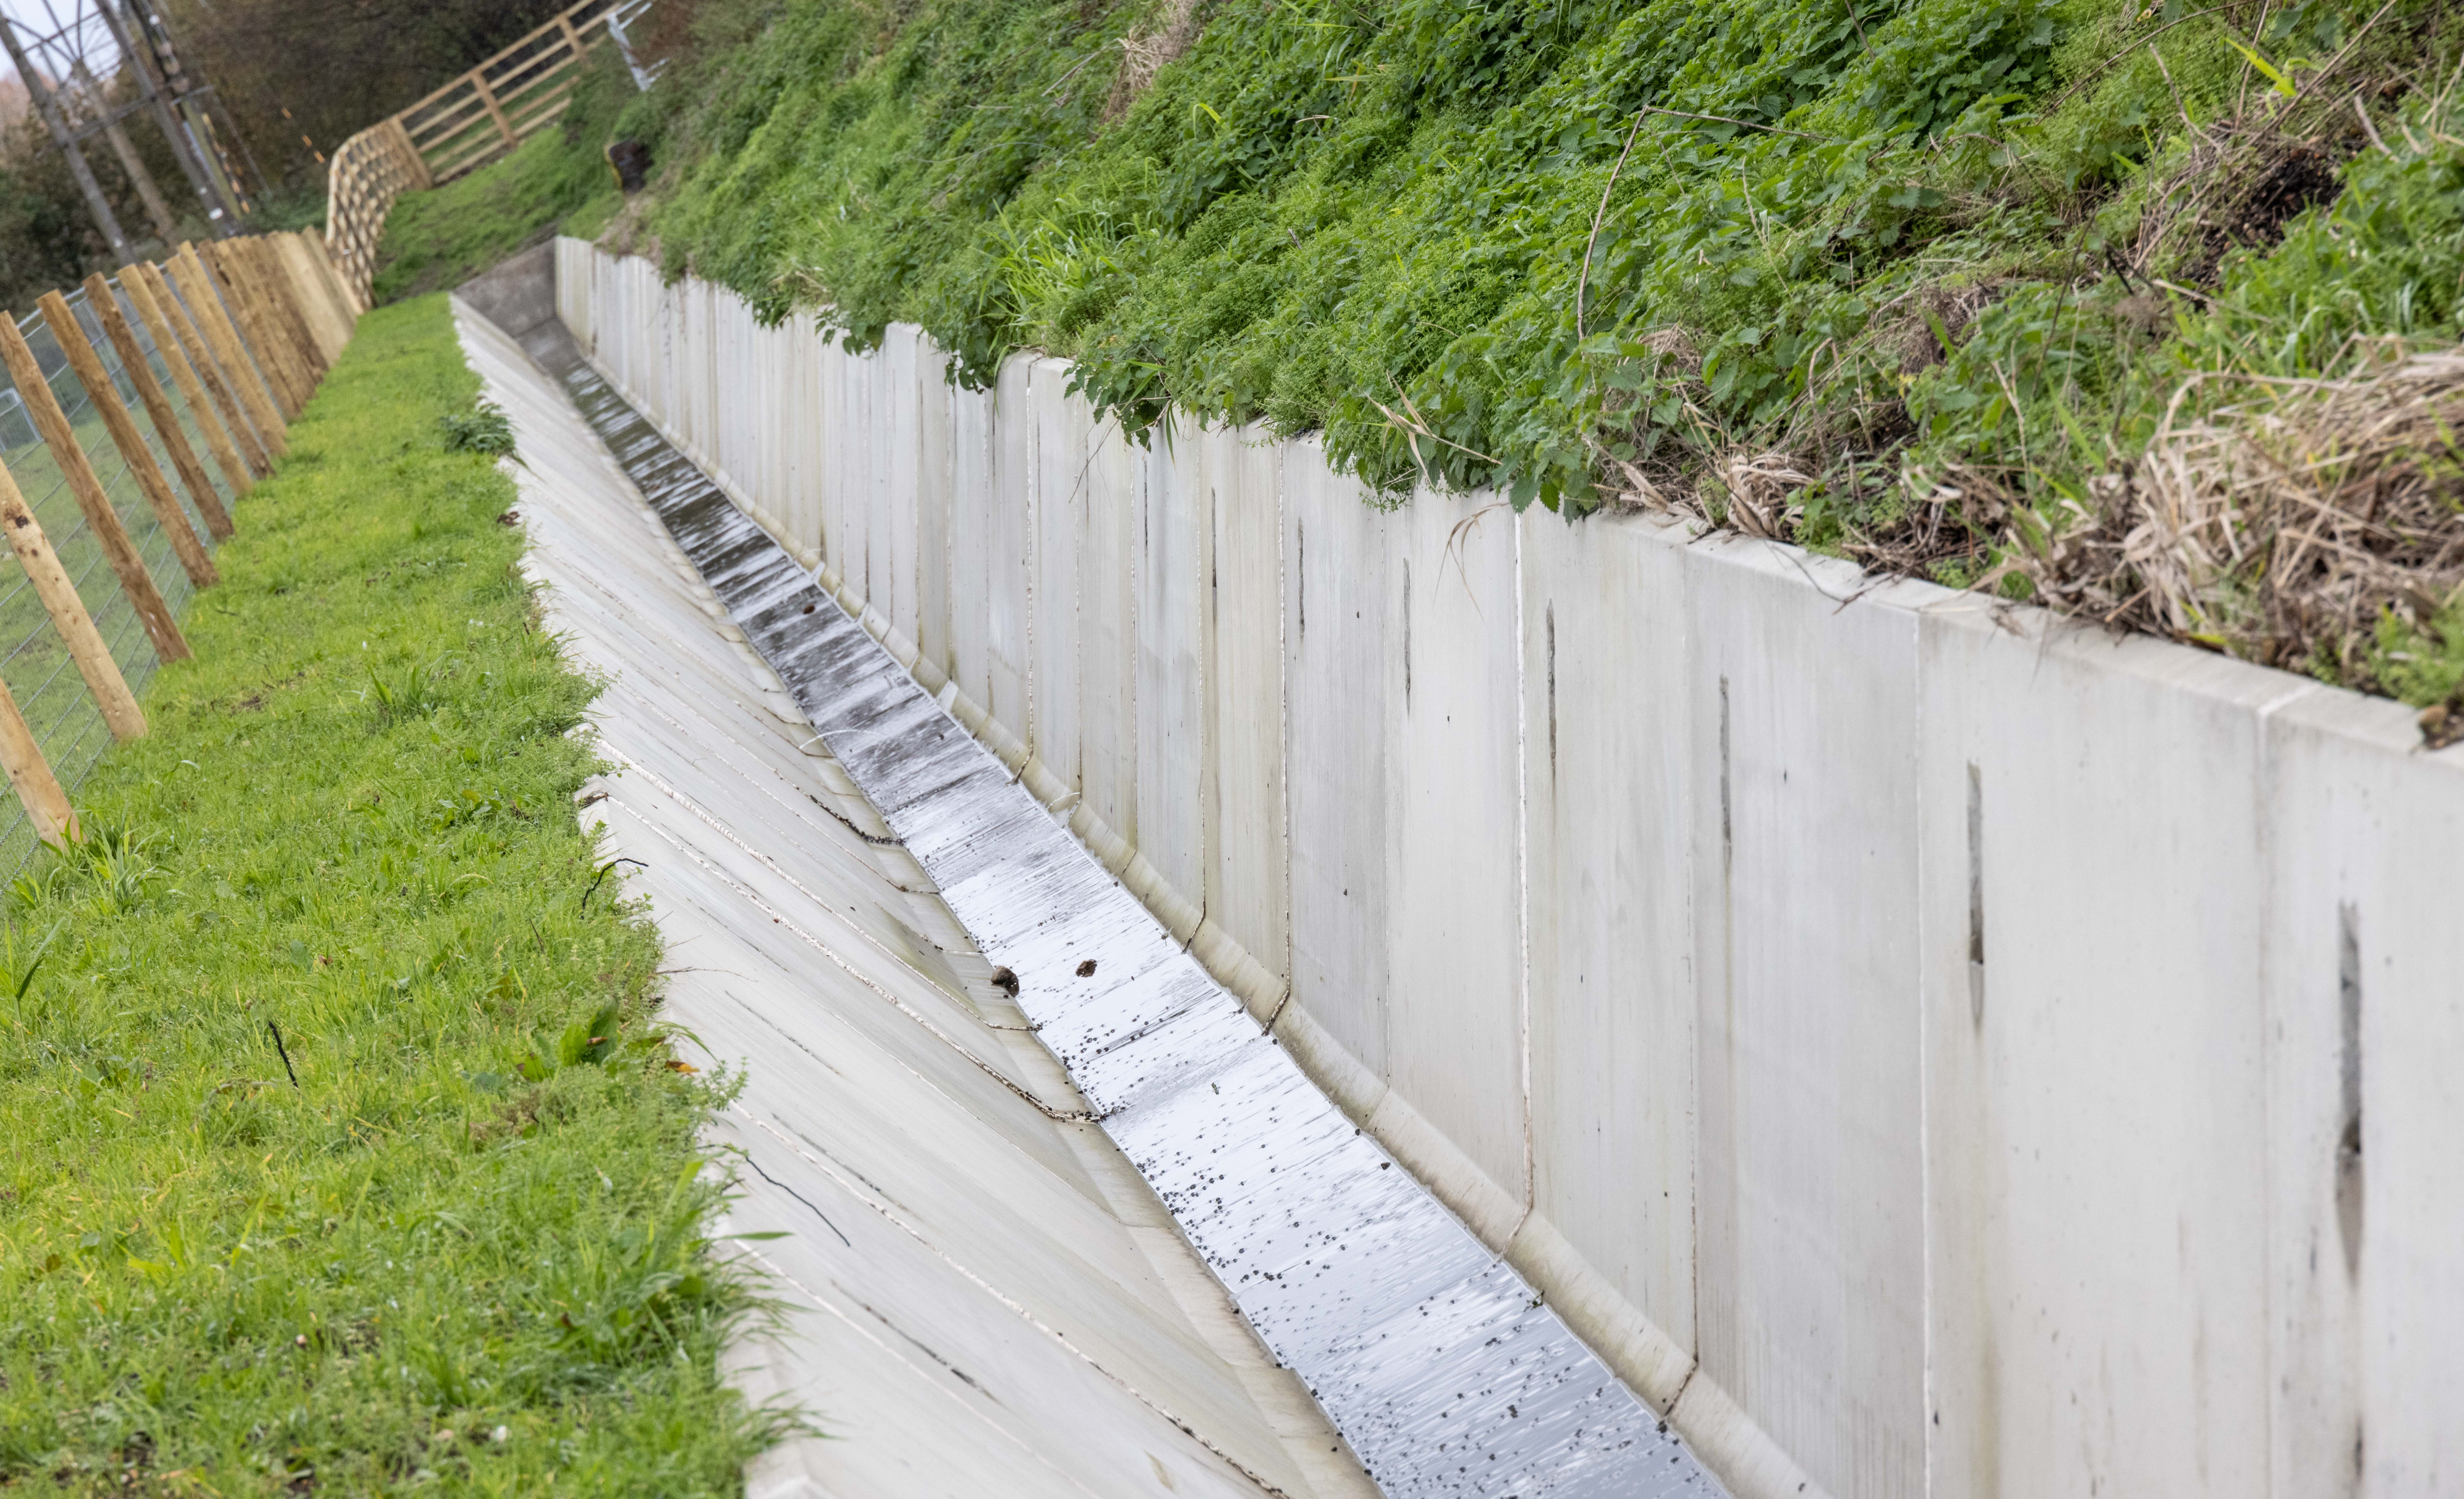 Muntons embankment with new drainage system installed.